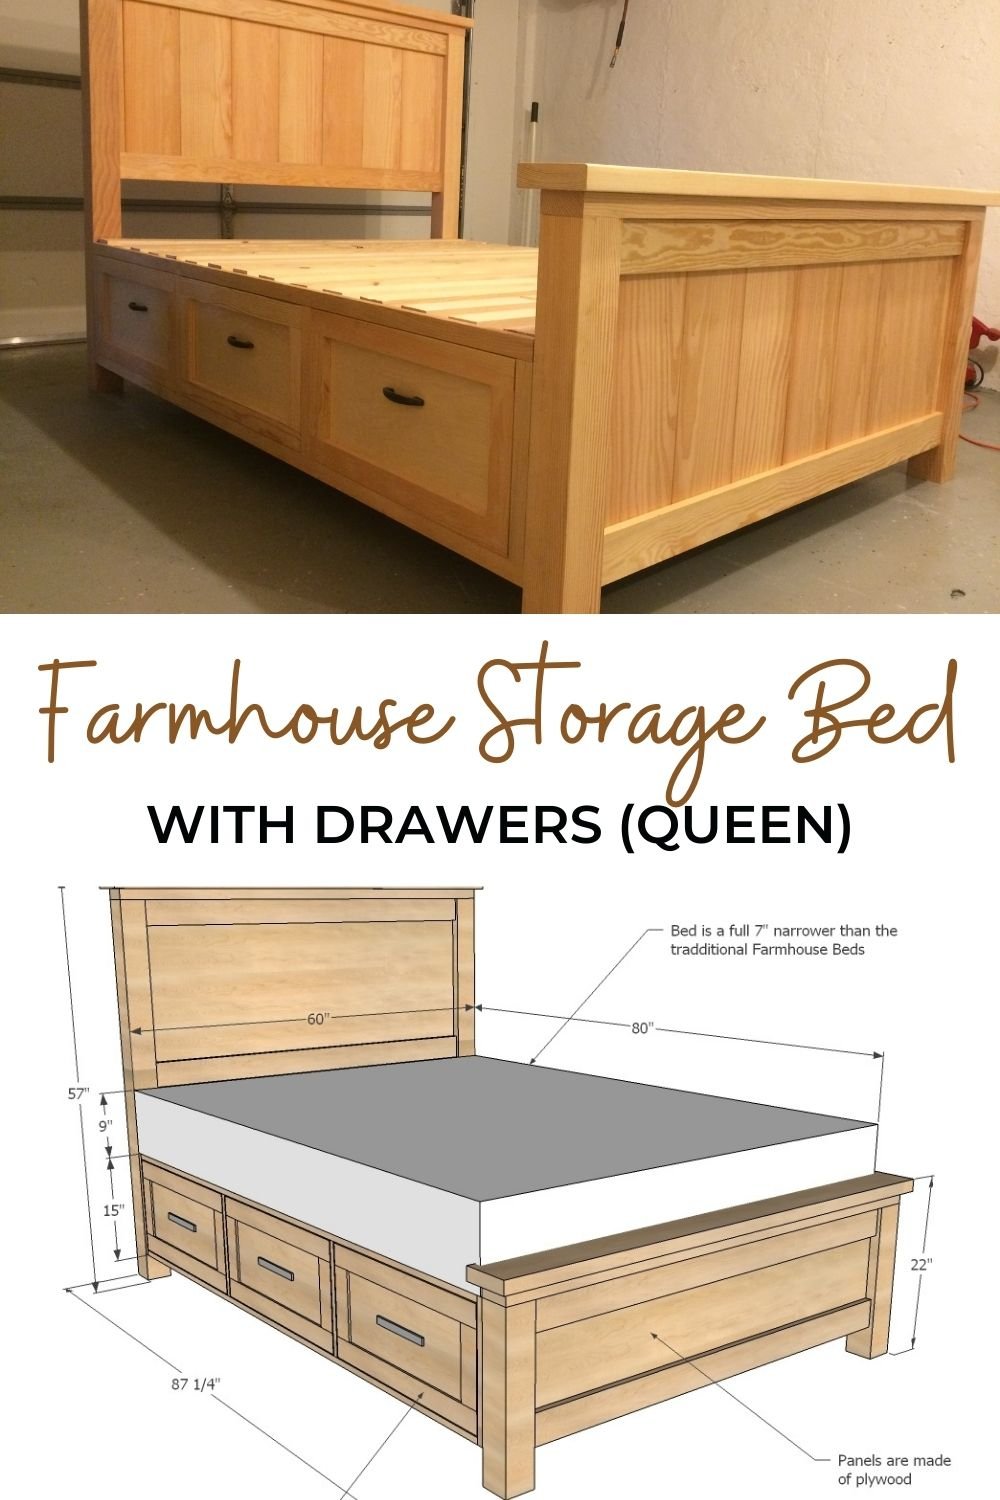 Farmhouse Storage Bed with Drawers